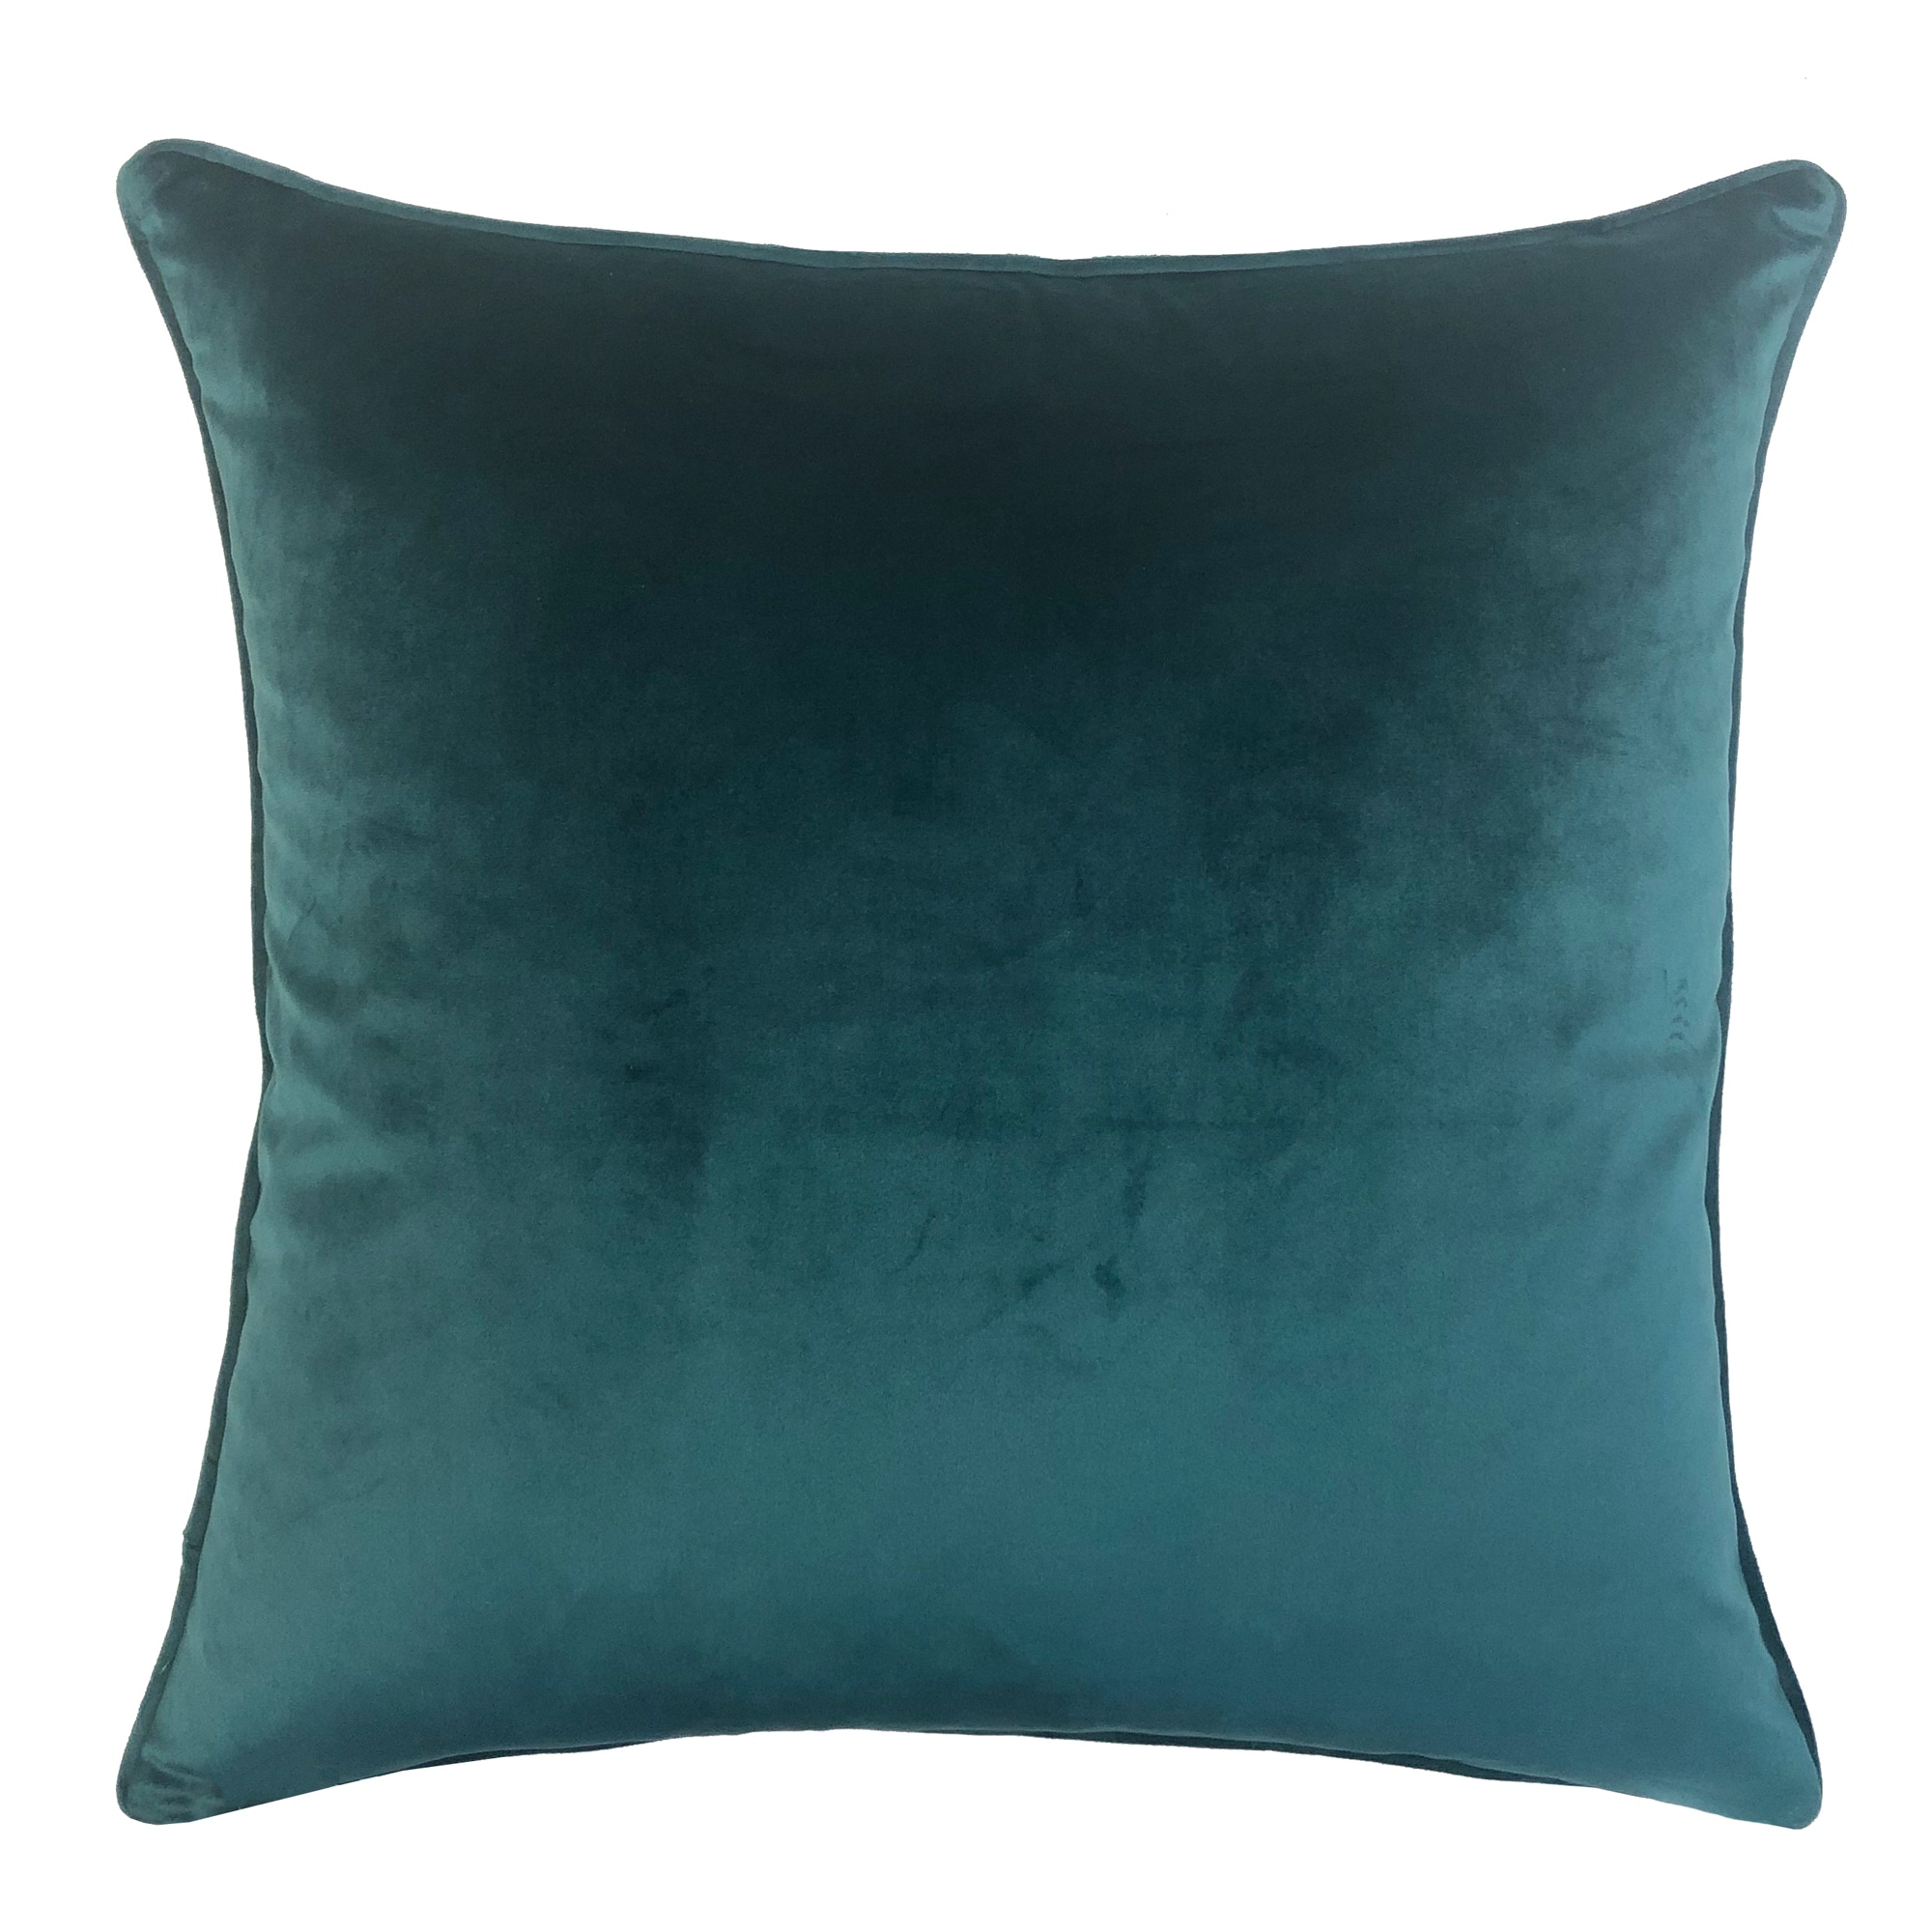 https://ak1.ostkcdn.com/images/products/is/images/direct/608a1c26547140bad08530f9a4abe66d587d8077/Rodeo-Home-Alaya-Luxury-Cut-Velvet-Square-Throw-Pillow.jpg